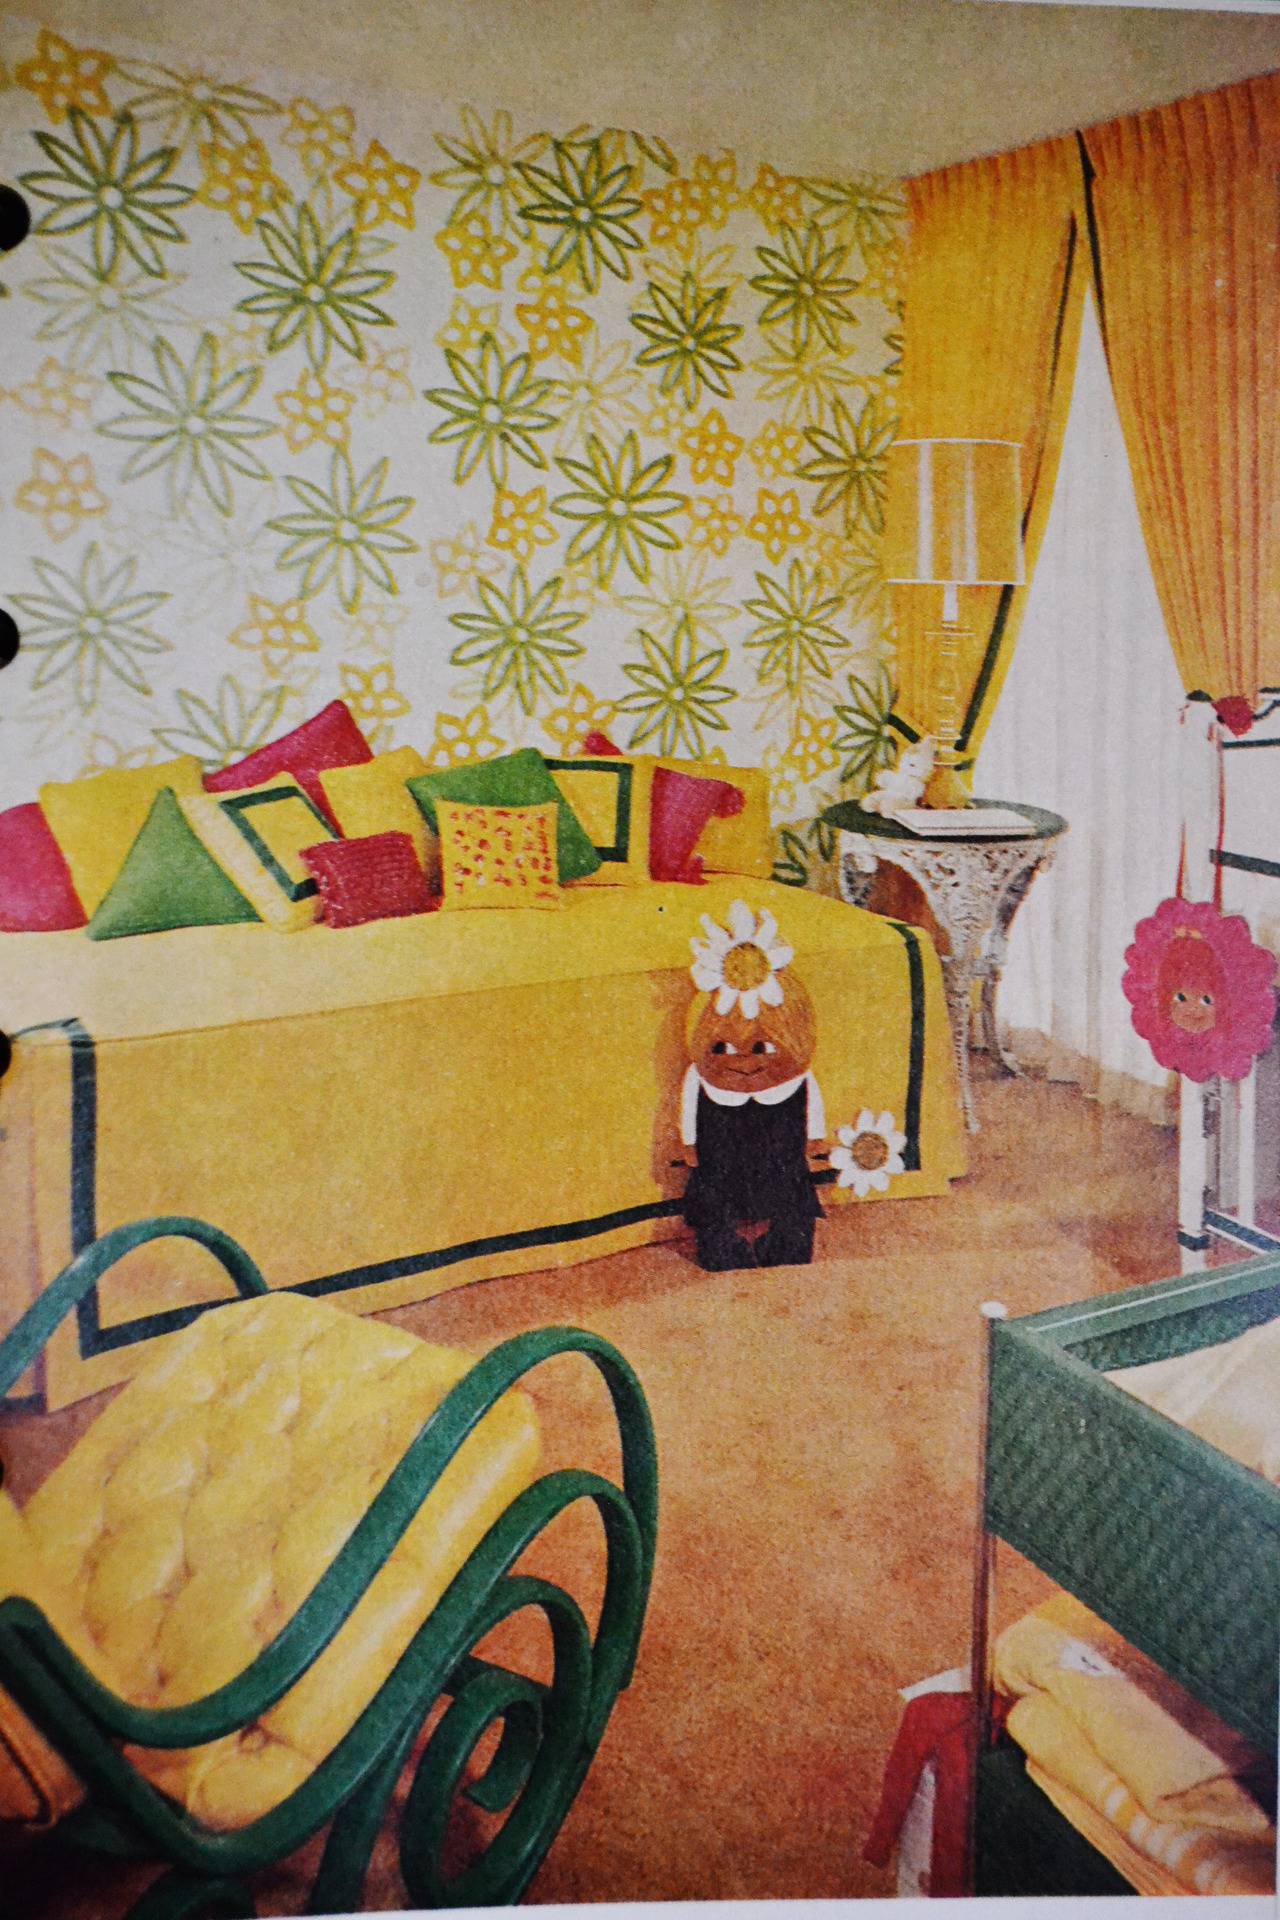 60s style wallpaper,room,interior design,yellow,furniture,wall